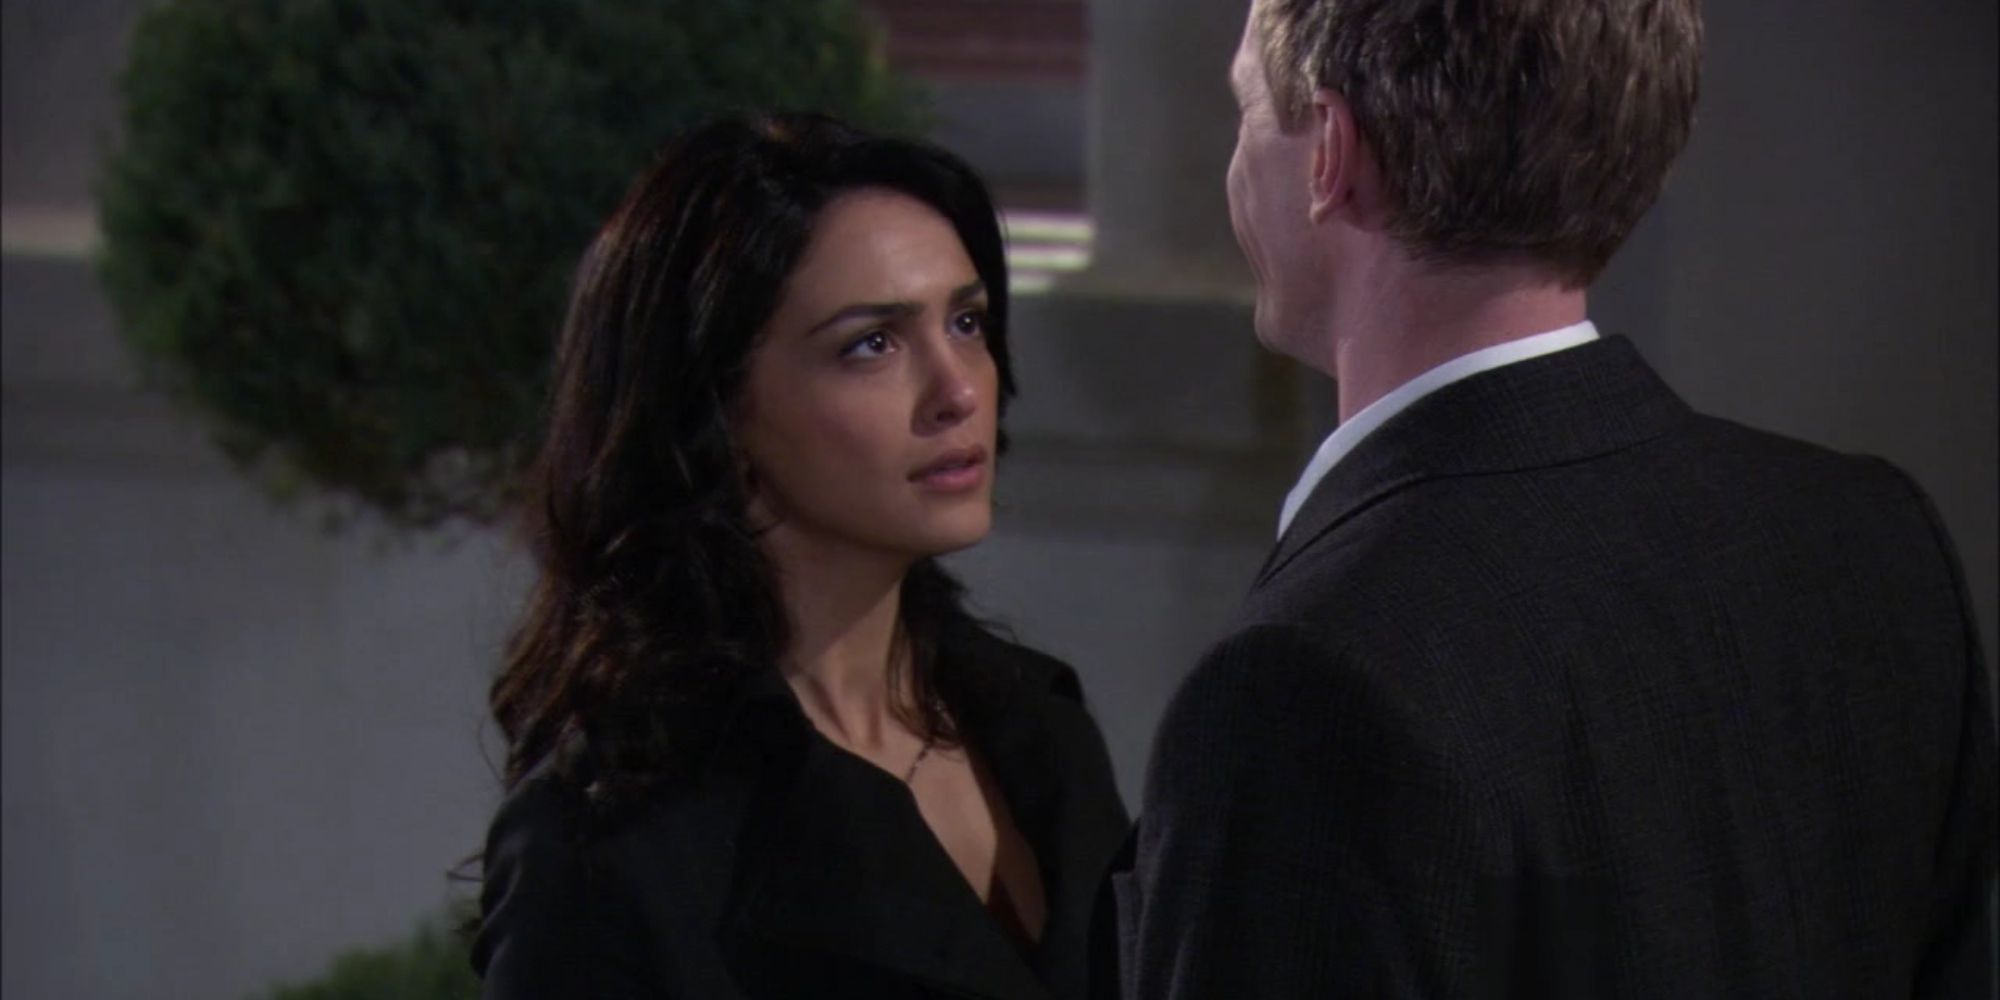 Still Of Nora Speaking To Barney in How I Met Your Mother.